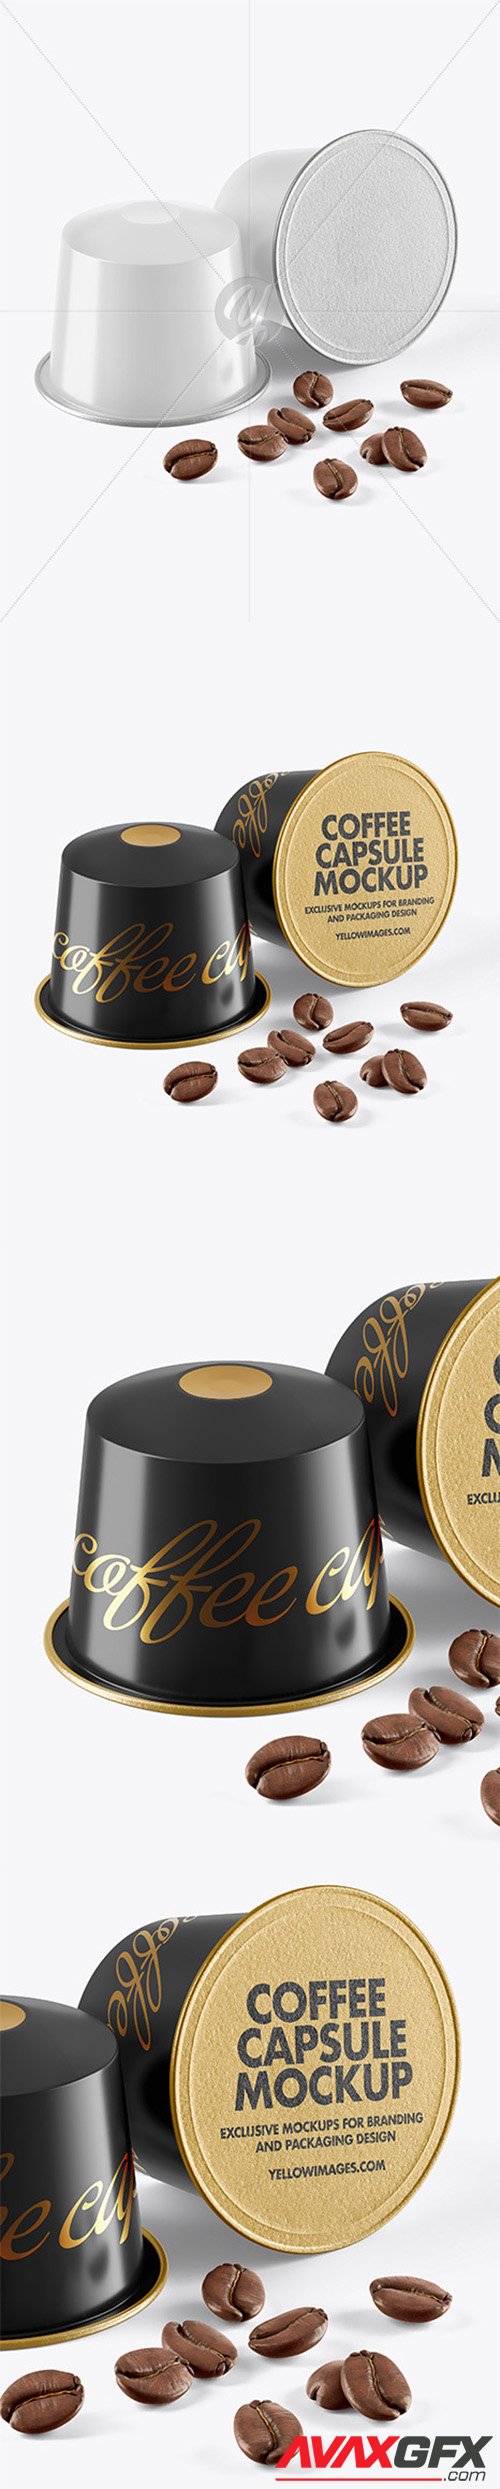 Download Paper Box W Coffee Capsules Mockup 58321 Avaxgfx All Downloads That You Need In One Place Graphic From Nitroflare Rapidgator PSD Mockup Templates